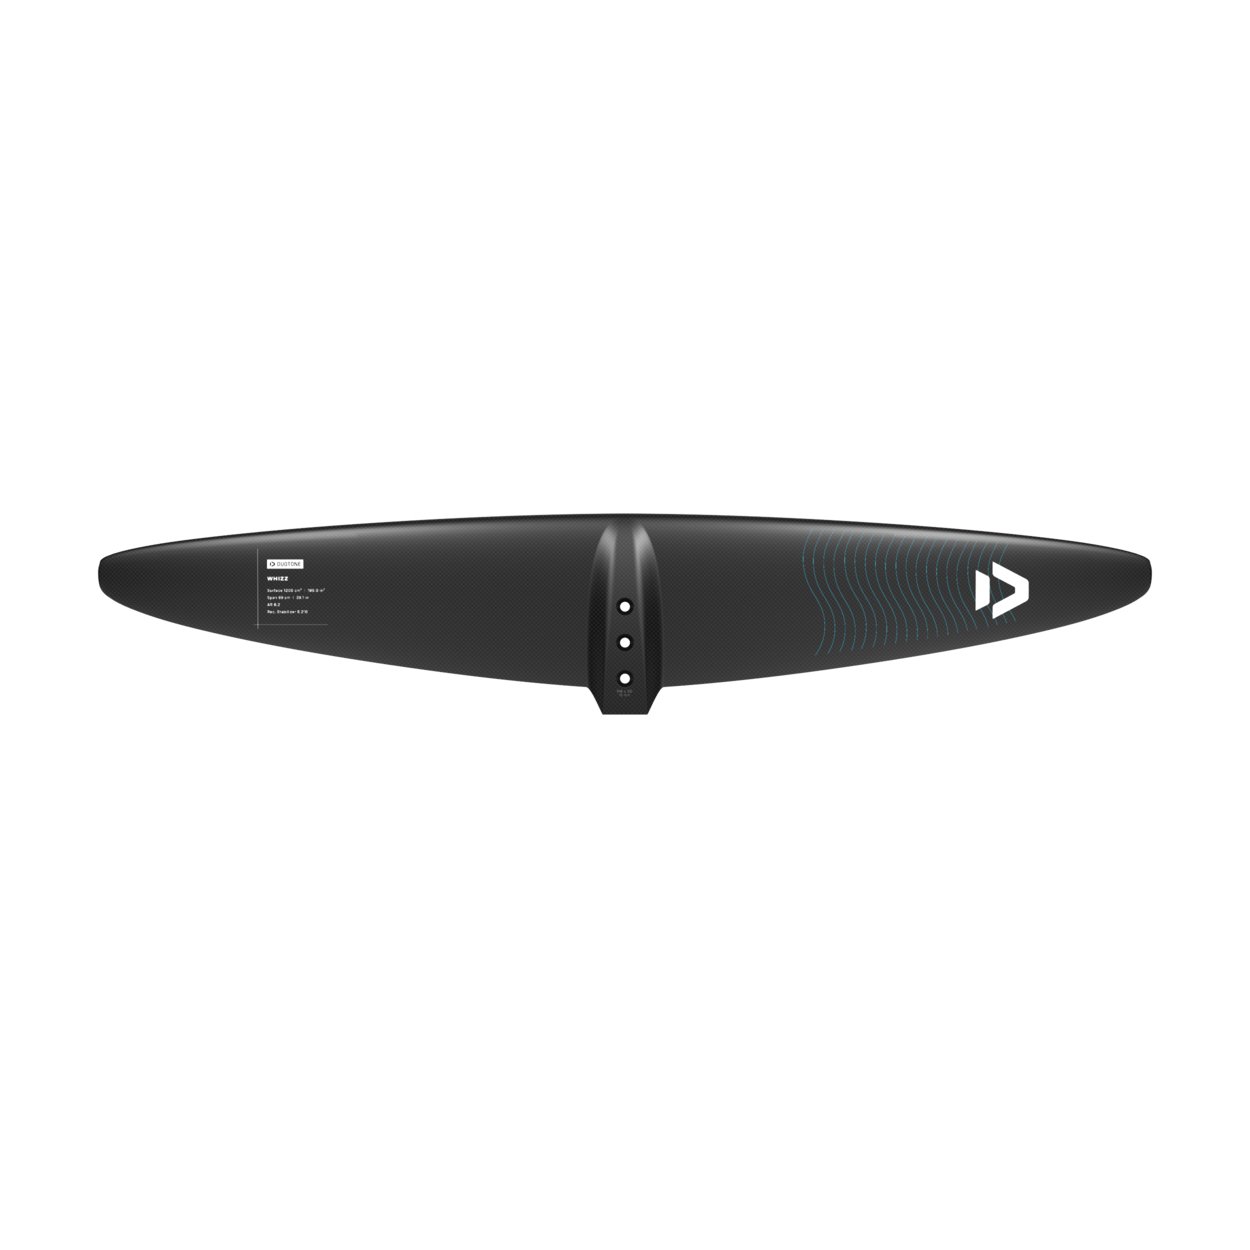 Duotone Foilpart Front Wing Whizz SLS 2025 - Worthing Watersports - 9010583235059 - Foilparts - Duotone X